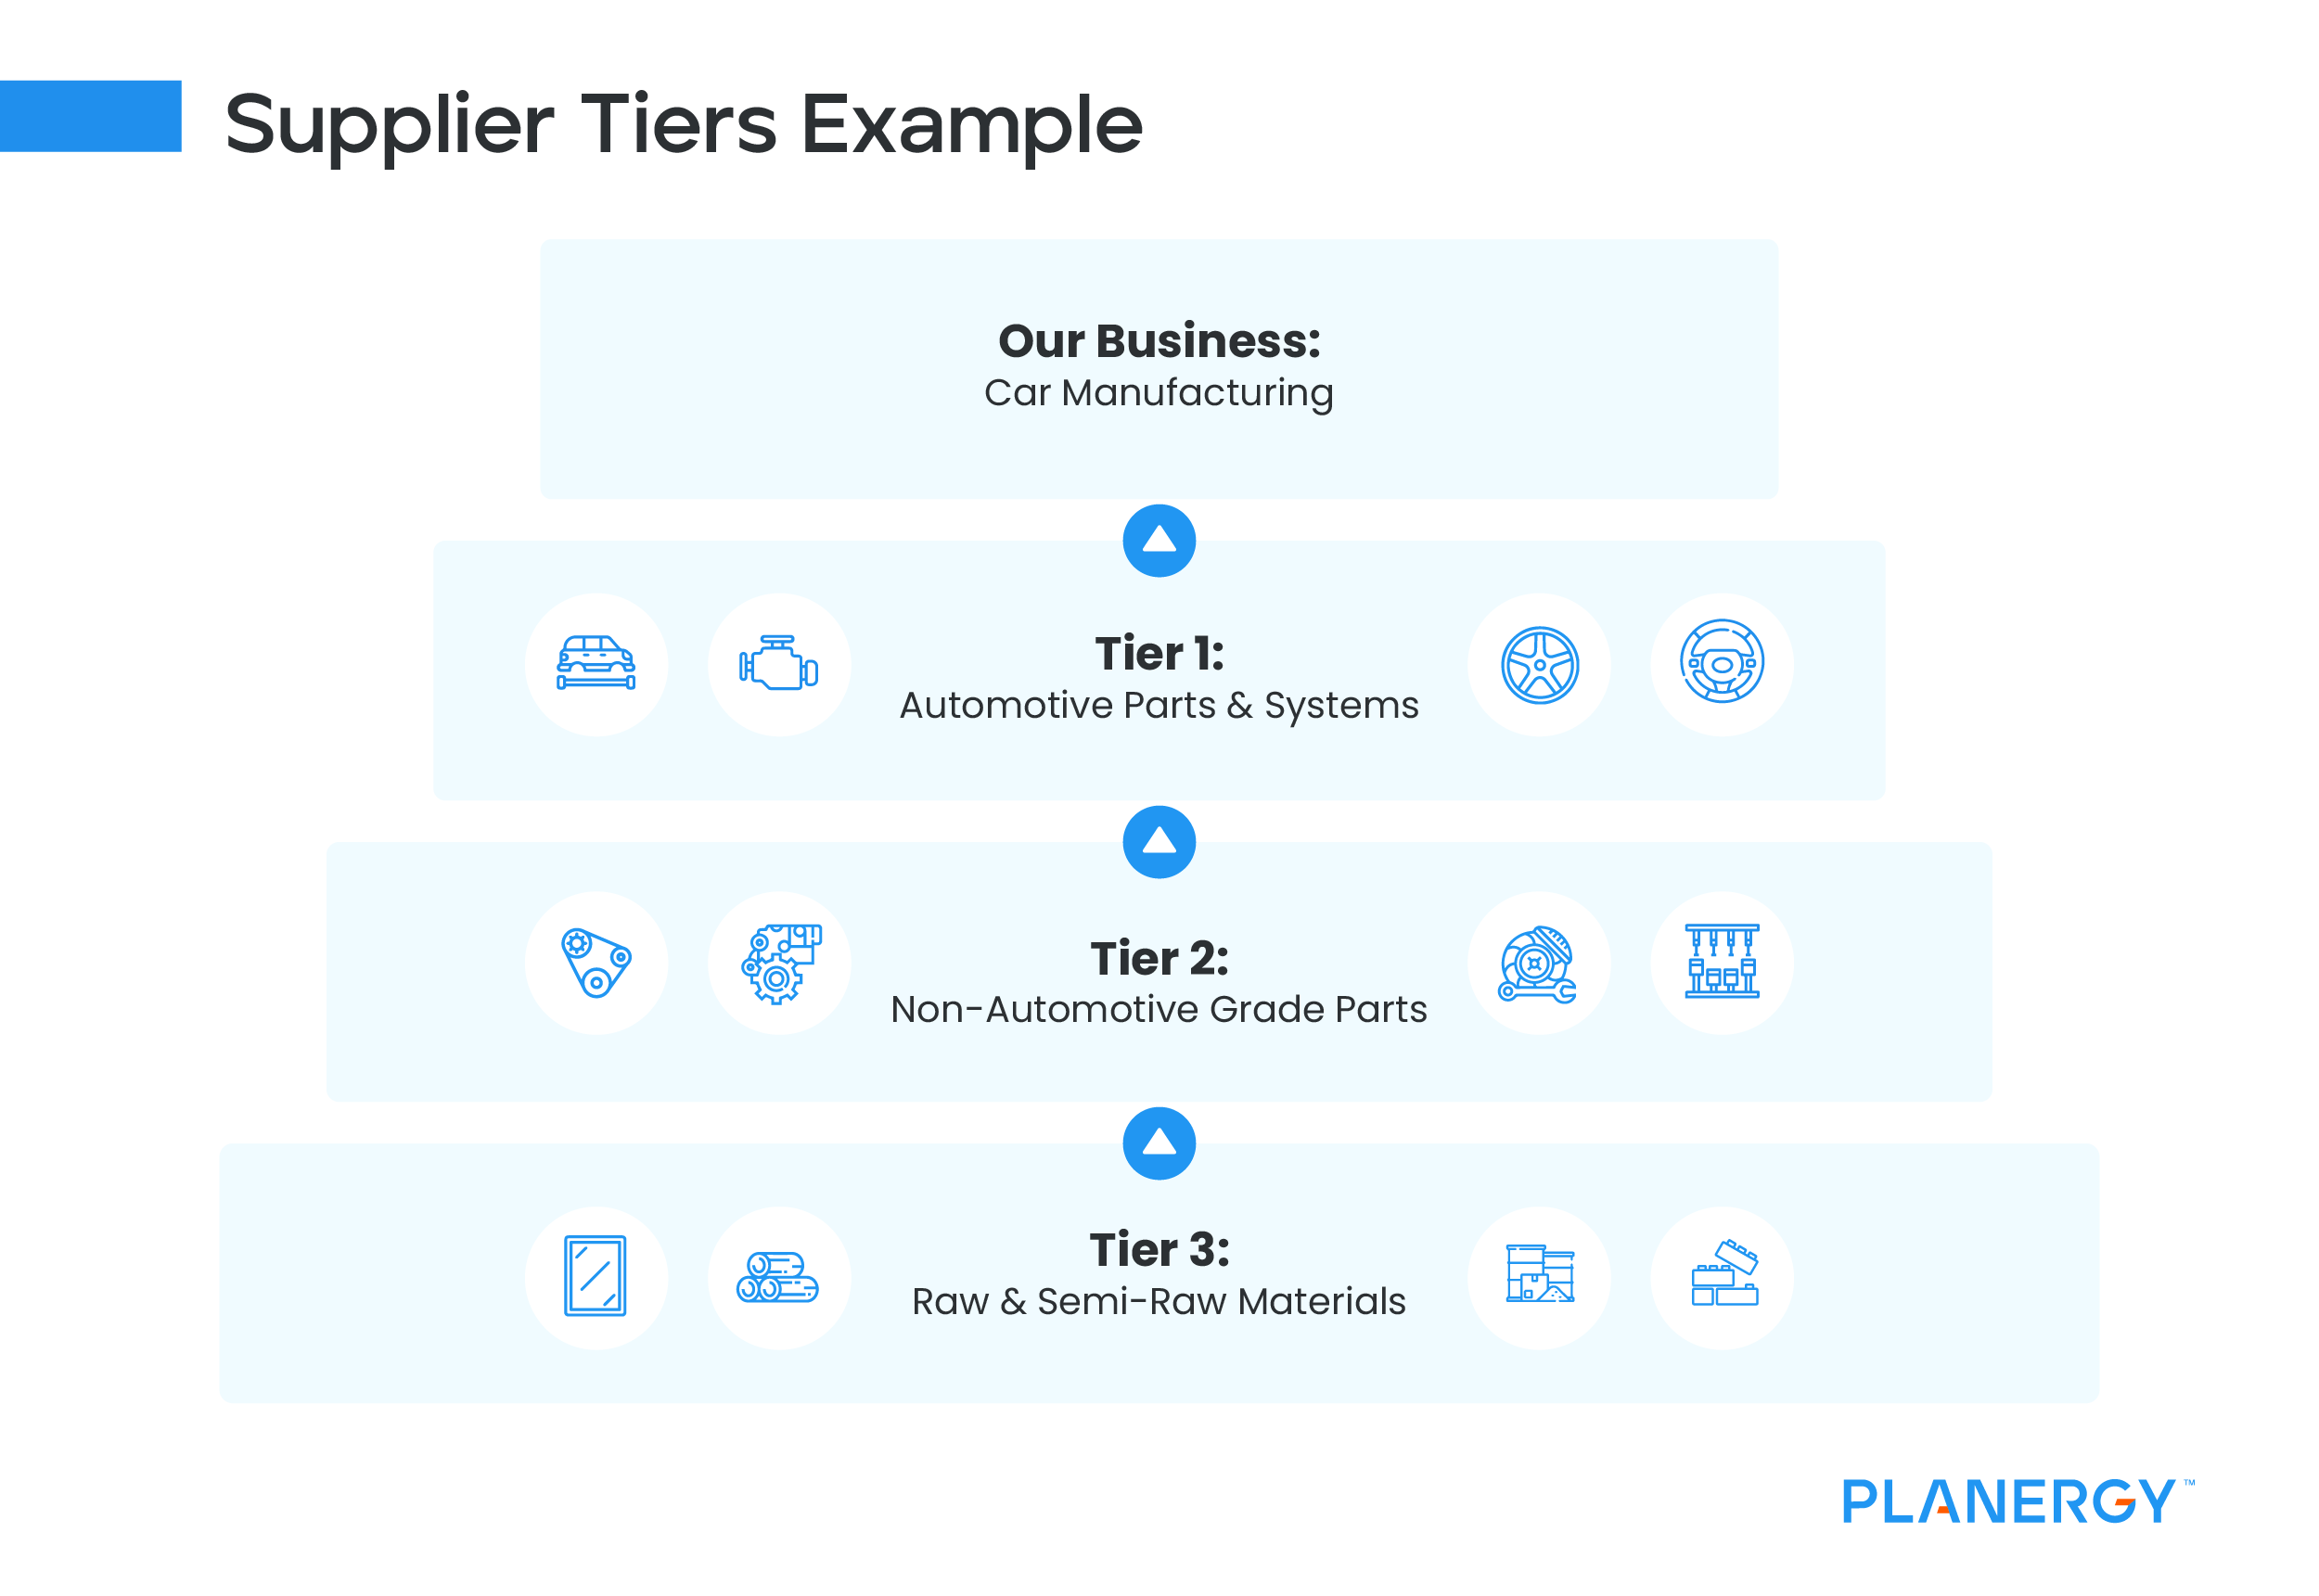 Supplier Tiers Example